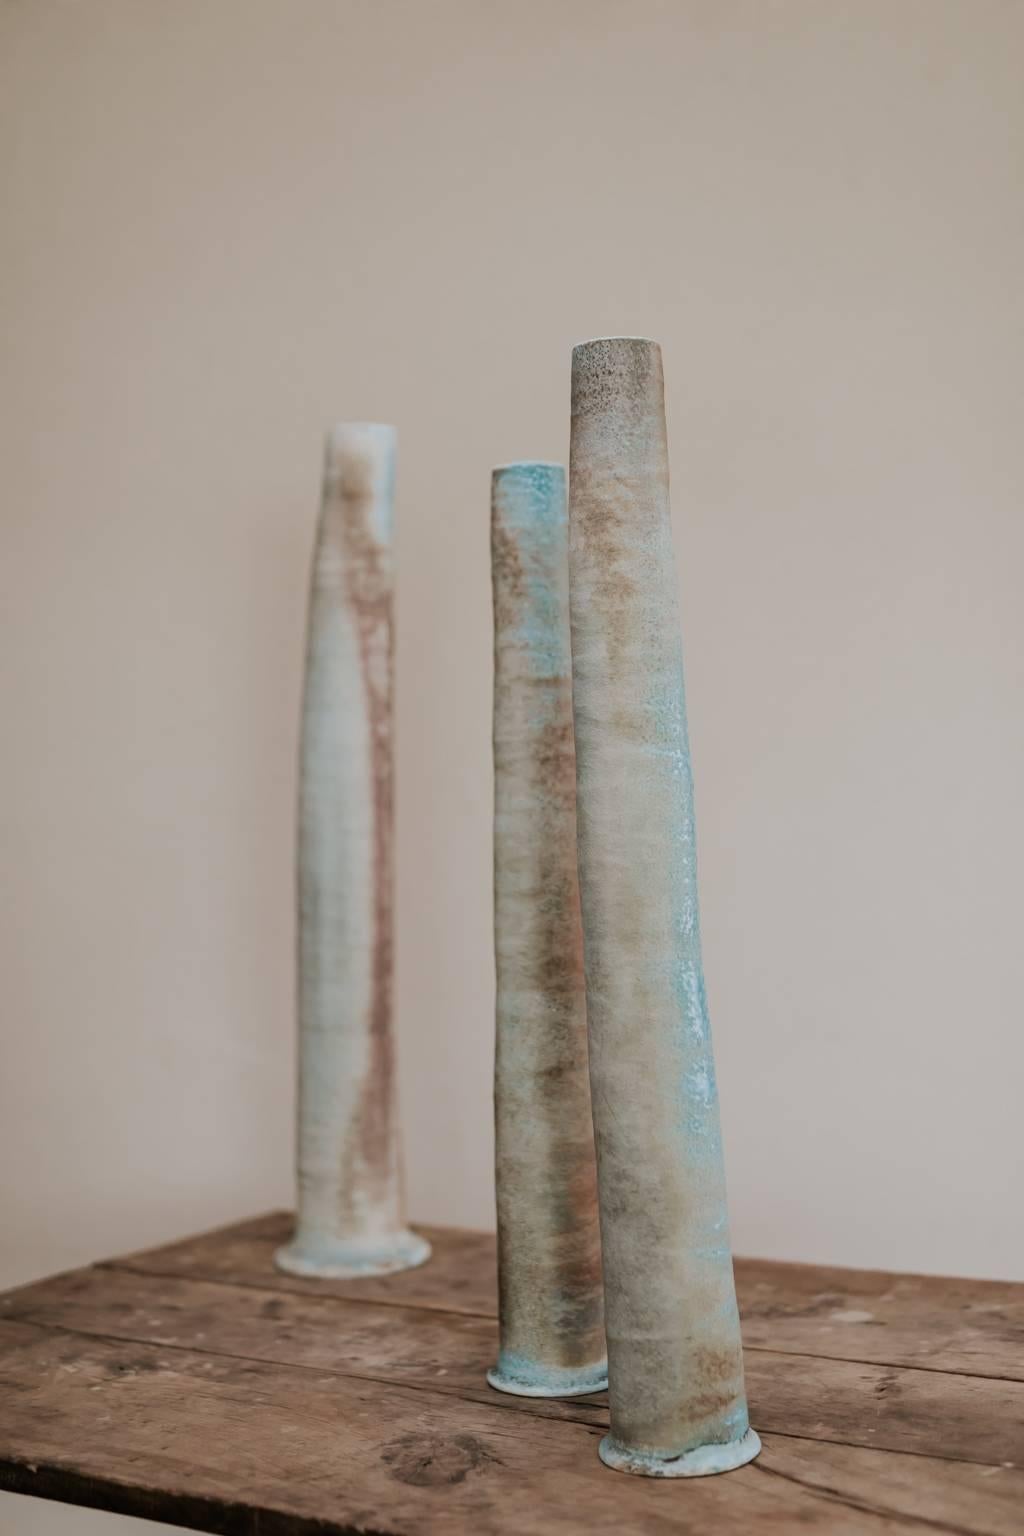 Jack Doherty born 1948, Coleraine, is a Northern Irish studio potter and author.
Totally in love with his work, these ceramic vases have great character and lovely color.
Three different sizes: 83/13, 78/13 and 89/18 cm.